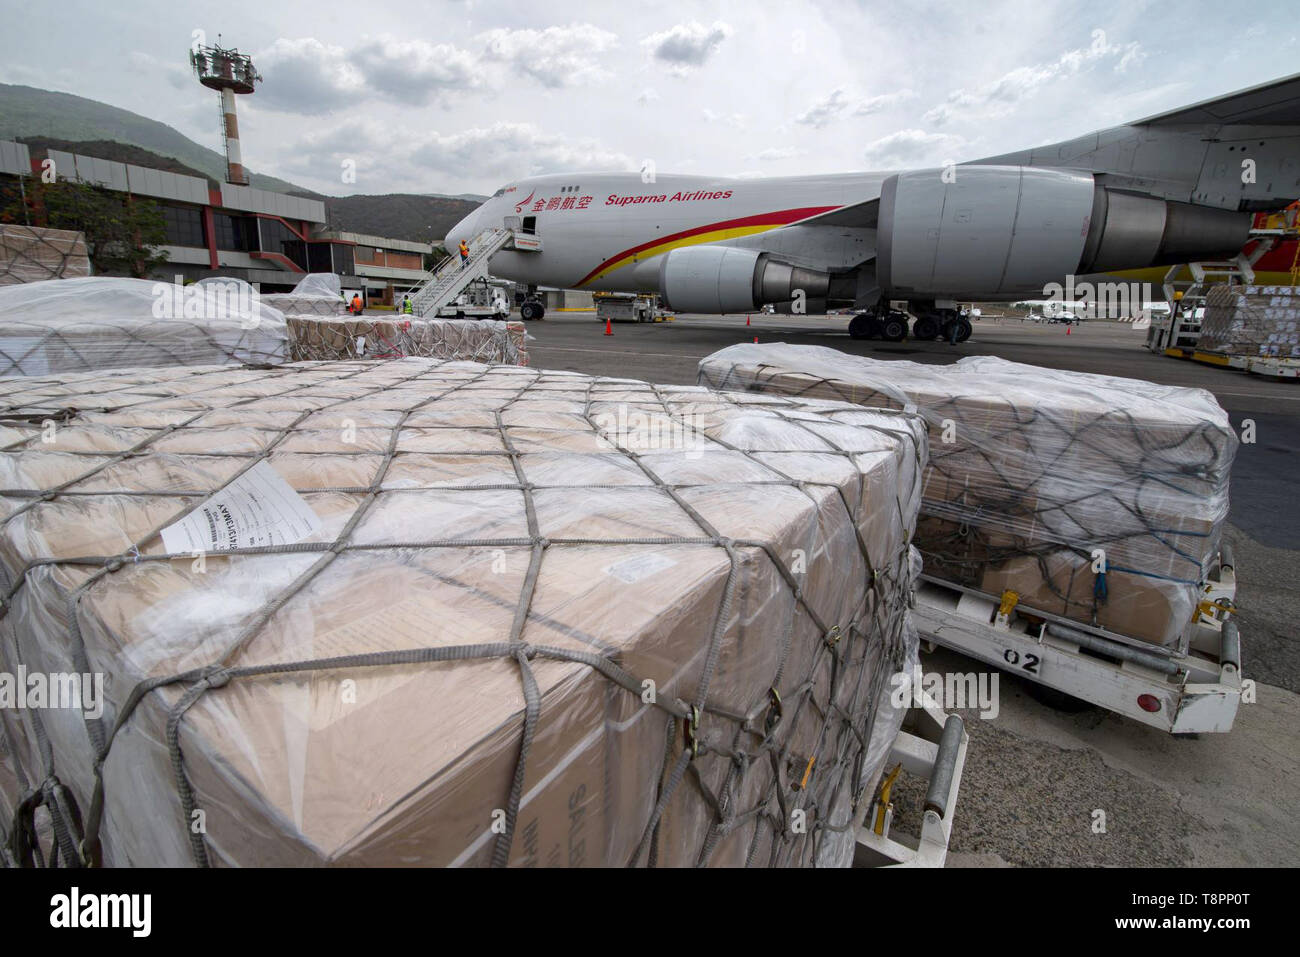 Caracas, Venezuela. 13th May, 2019. The second shipment of medical aid from China arrived at the Simon Bolivar International Airport in Caracas, Venezuela, May 13, 2019. The 71 tonnes of aid mainly consists of medicines and medical supplies. The first batch of medical assistance from China, made up of 65 tonnes of medicines and medical supplies, arrived in Venezuela in March. Credit: Marcos Salgado/Xinhua/Alamy Live News Stock Photo